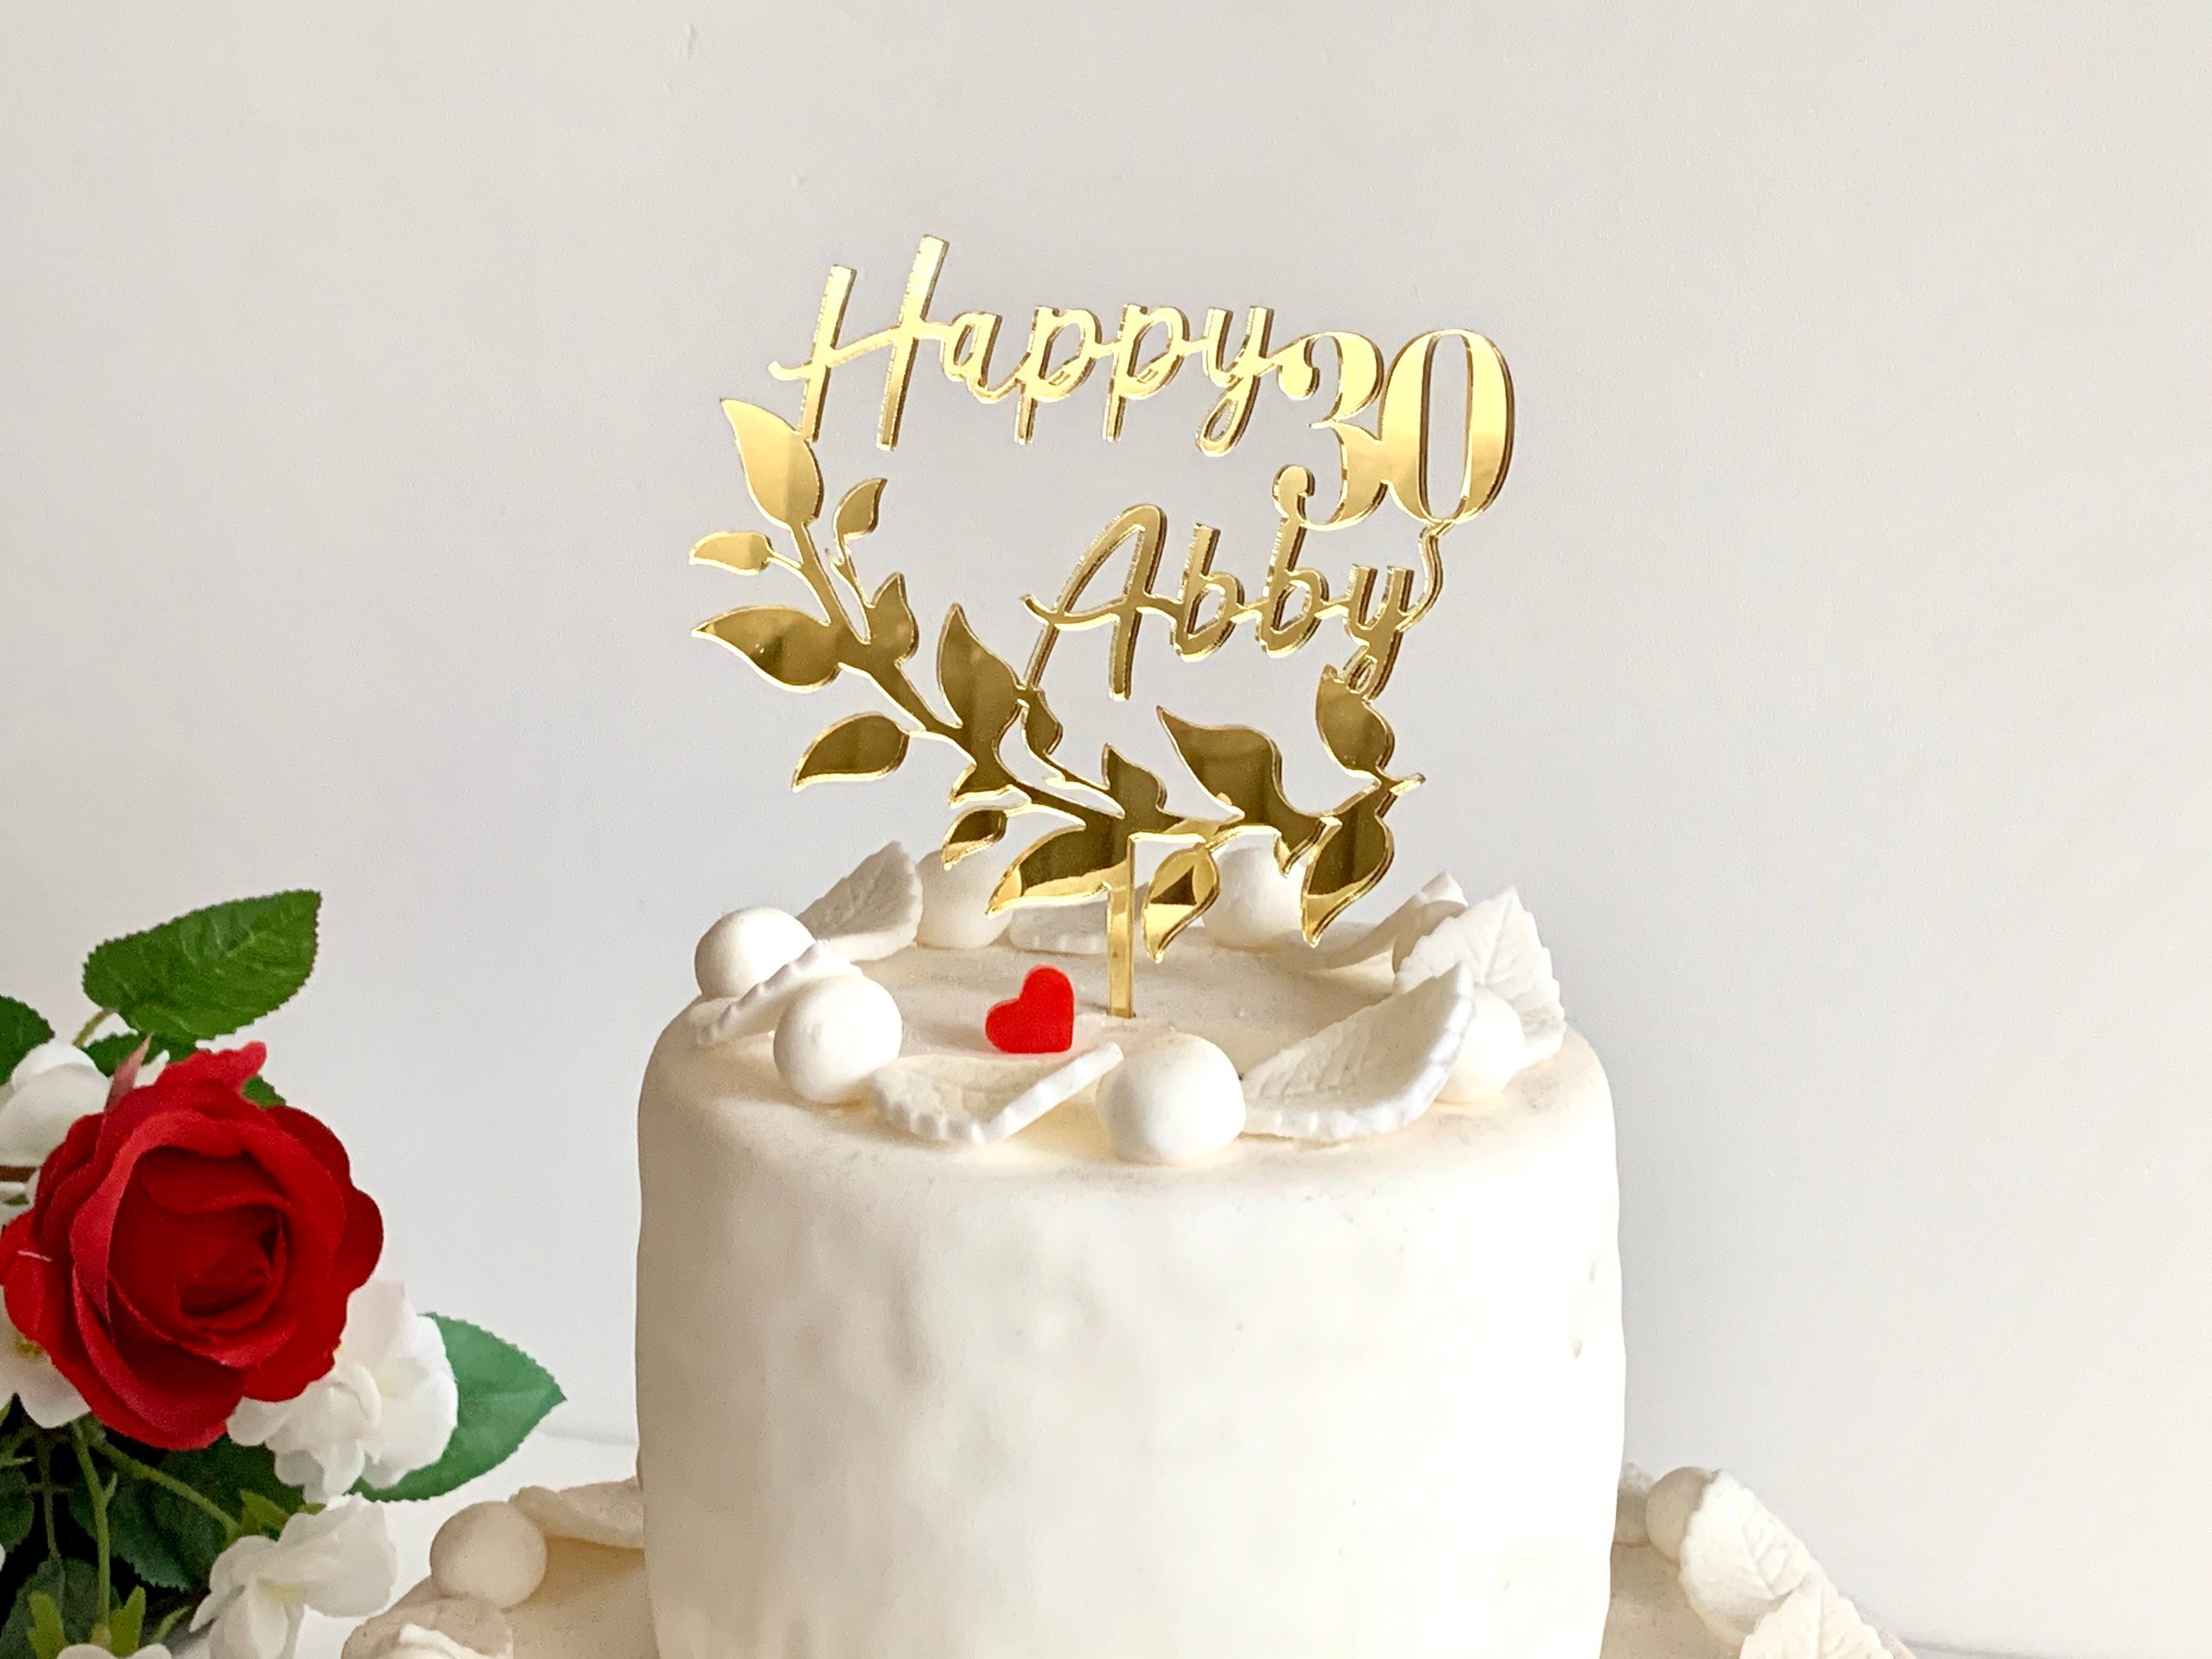 ABC Cake Topper Set Edible Fondant Letters Cake Topper Happy Birthday  Anniversary God Bless Sweet New Creations -  Norway